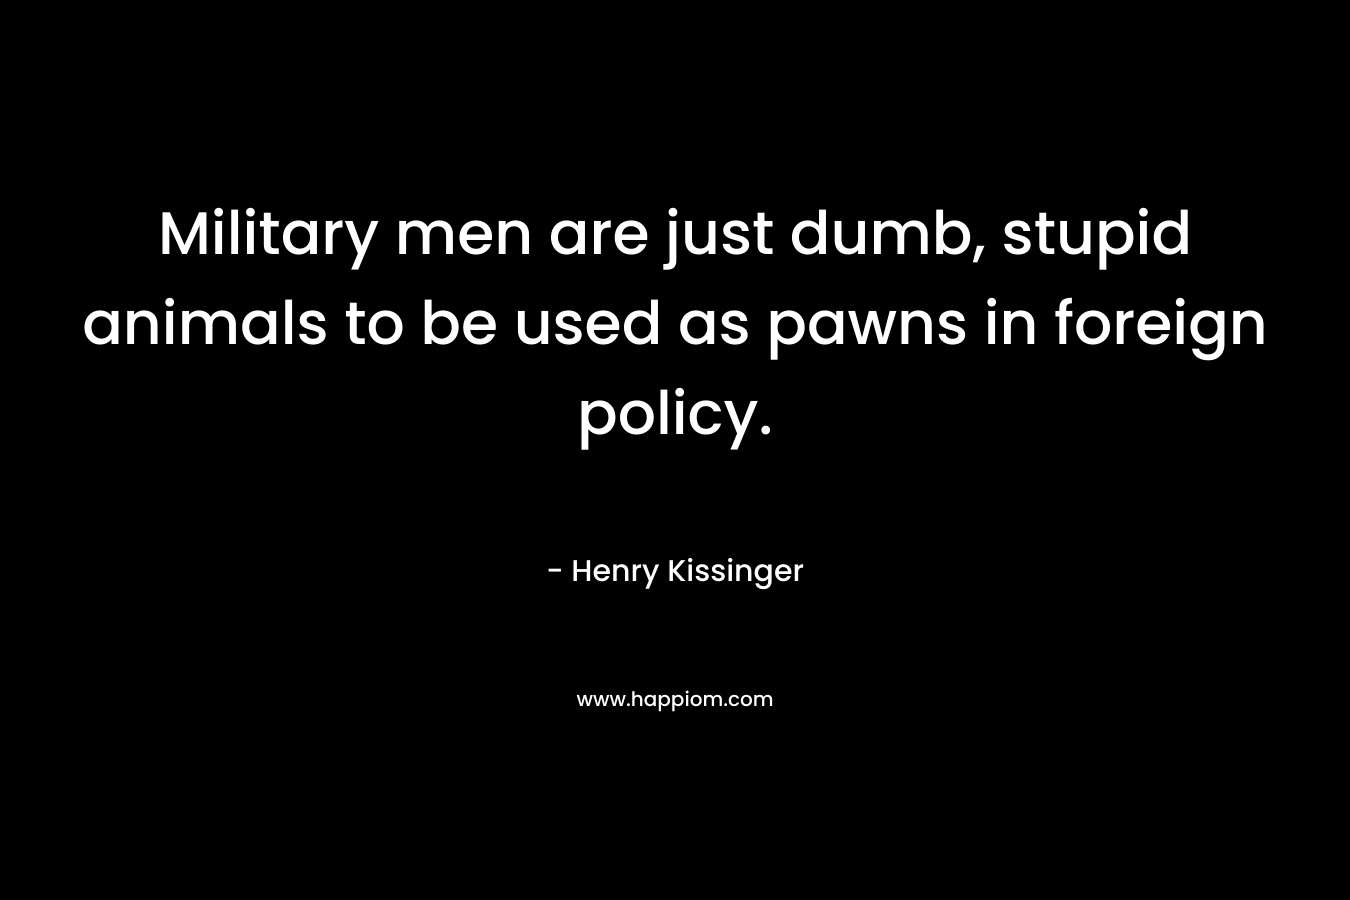 Military men are just dumb, stupid animals to be used as pawns in foreign policy. – Henry Kissinger